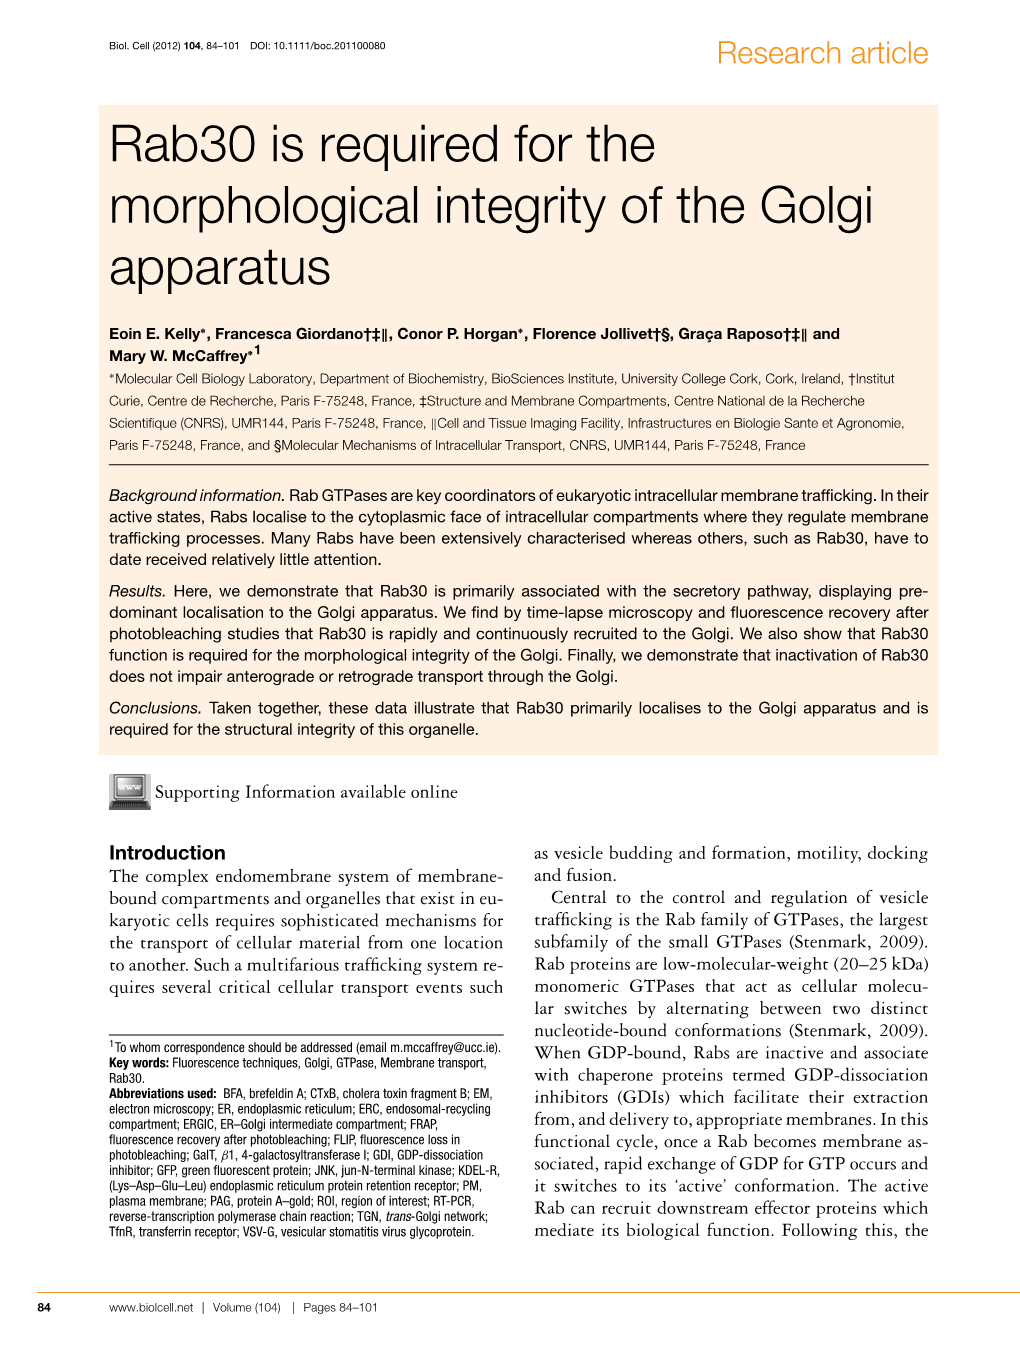 Rab30 Is Required for the Morphological Integrity of the Golgi Apparatus